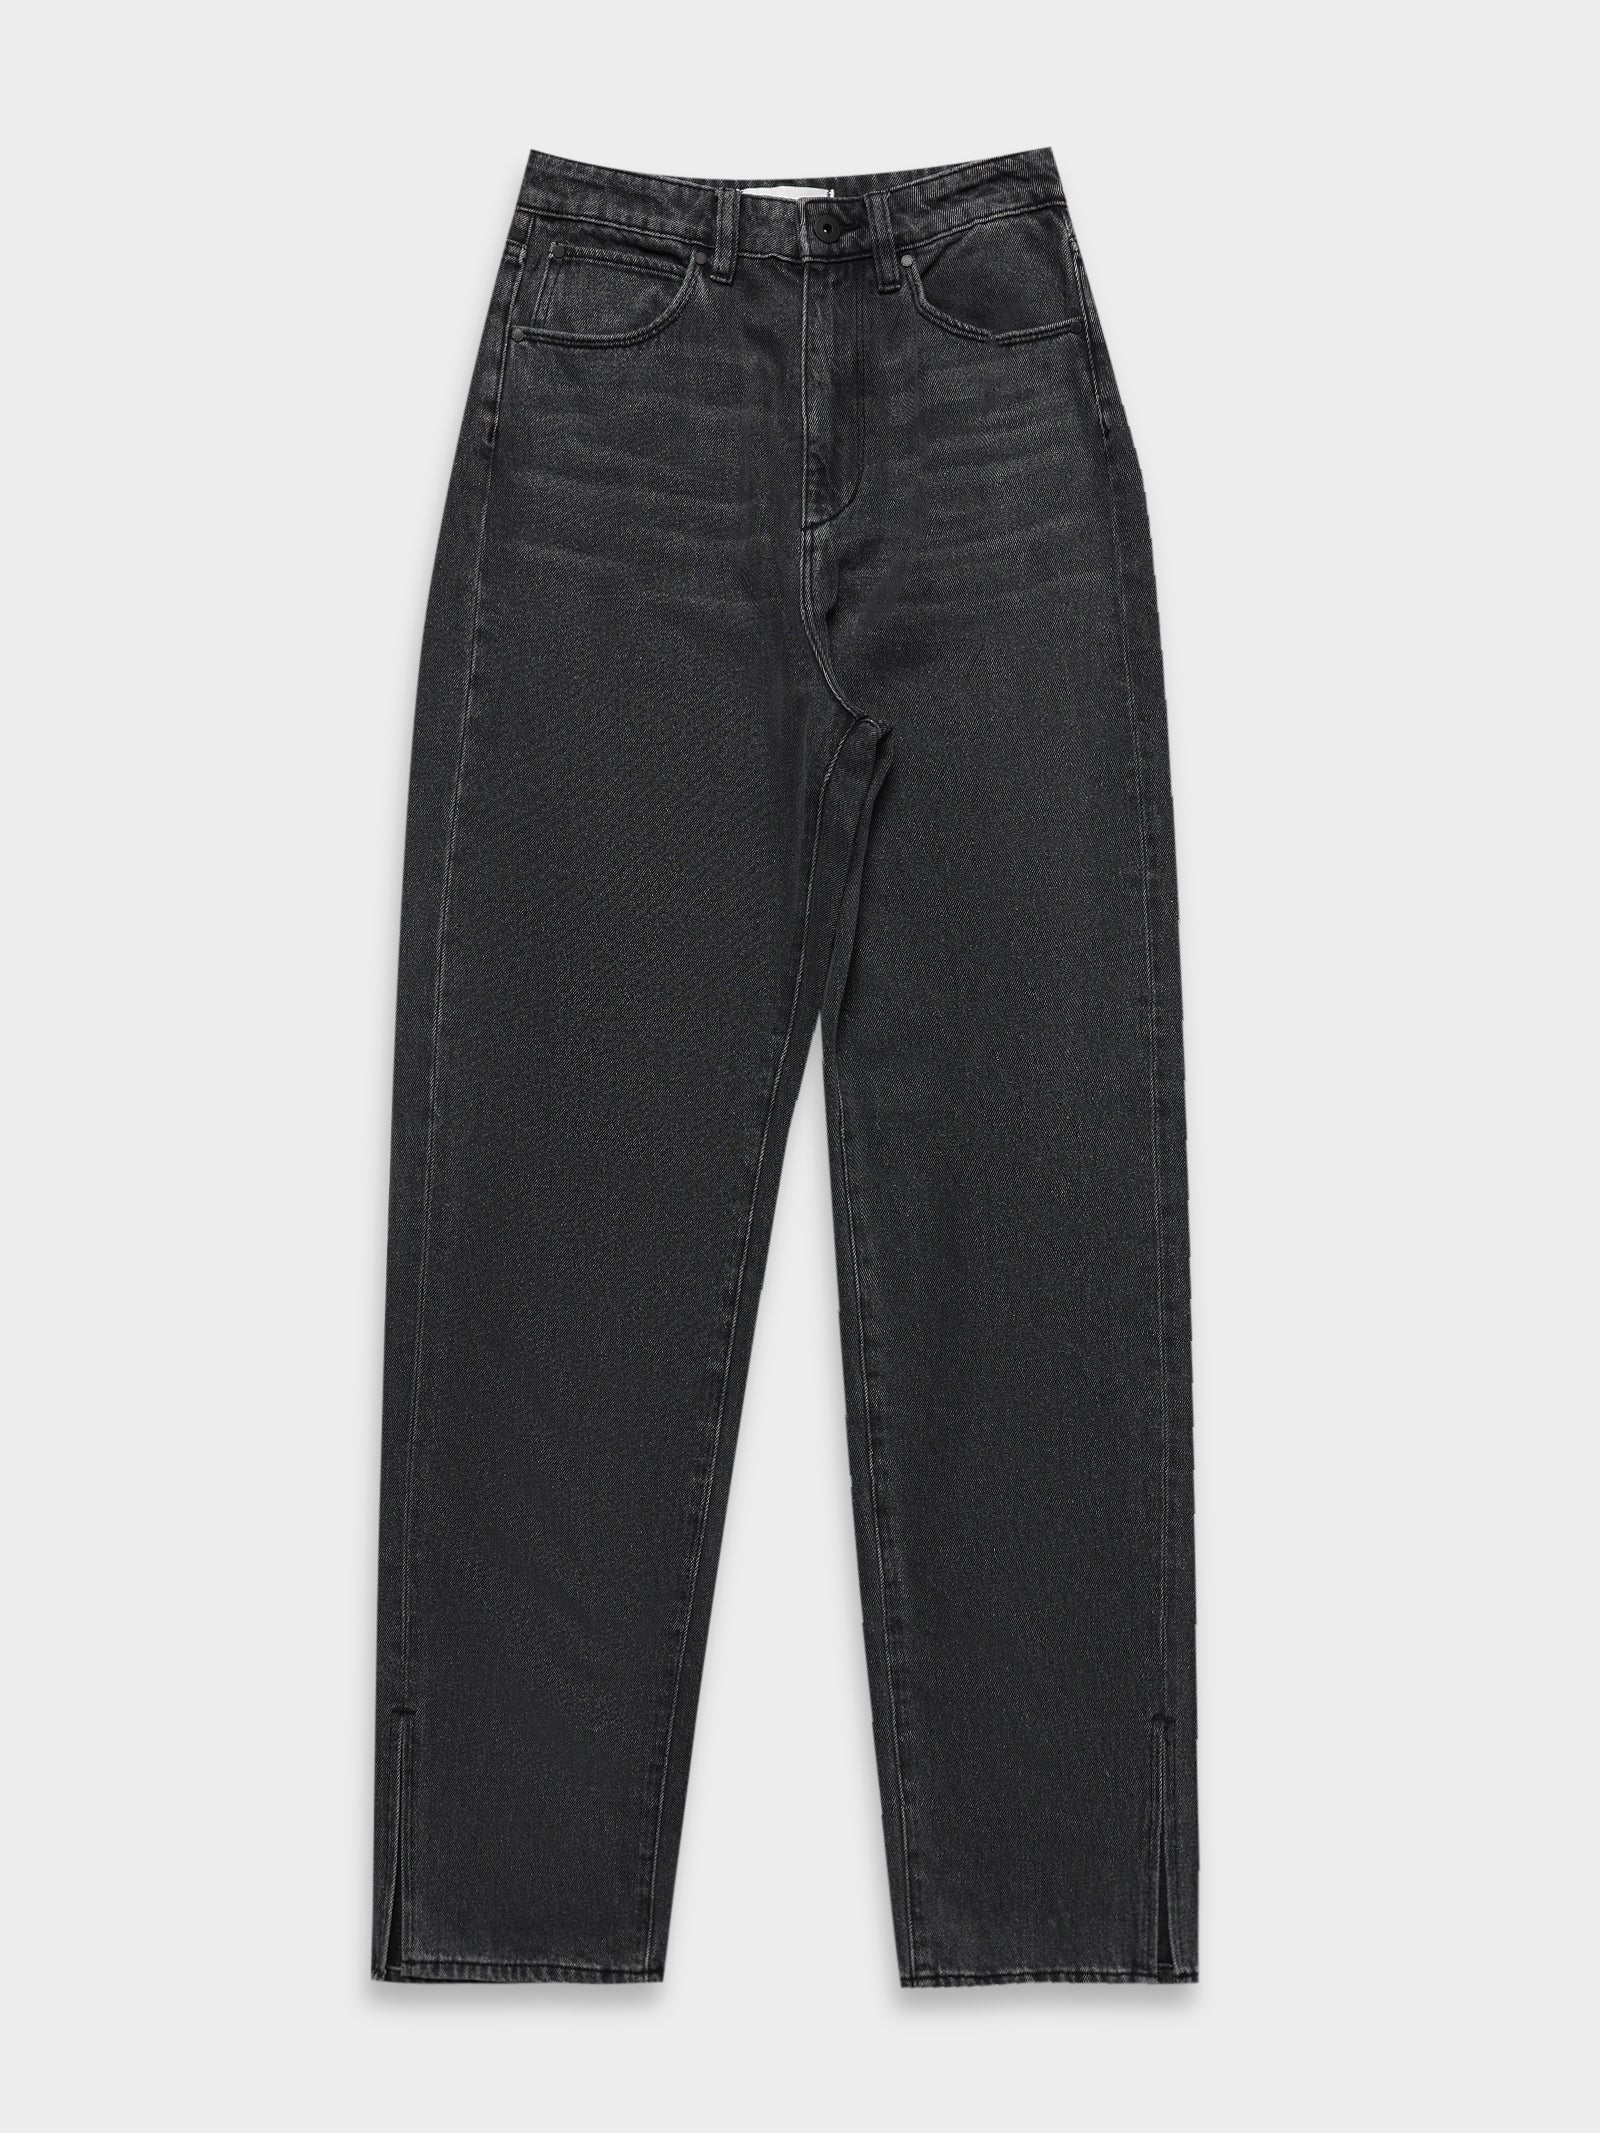 Hailey Baggy Split Jeans in Washed Black - Glue Store